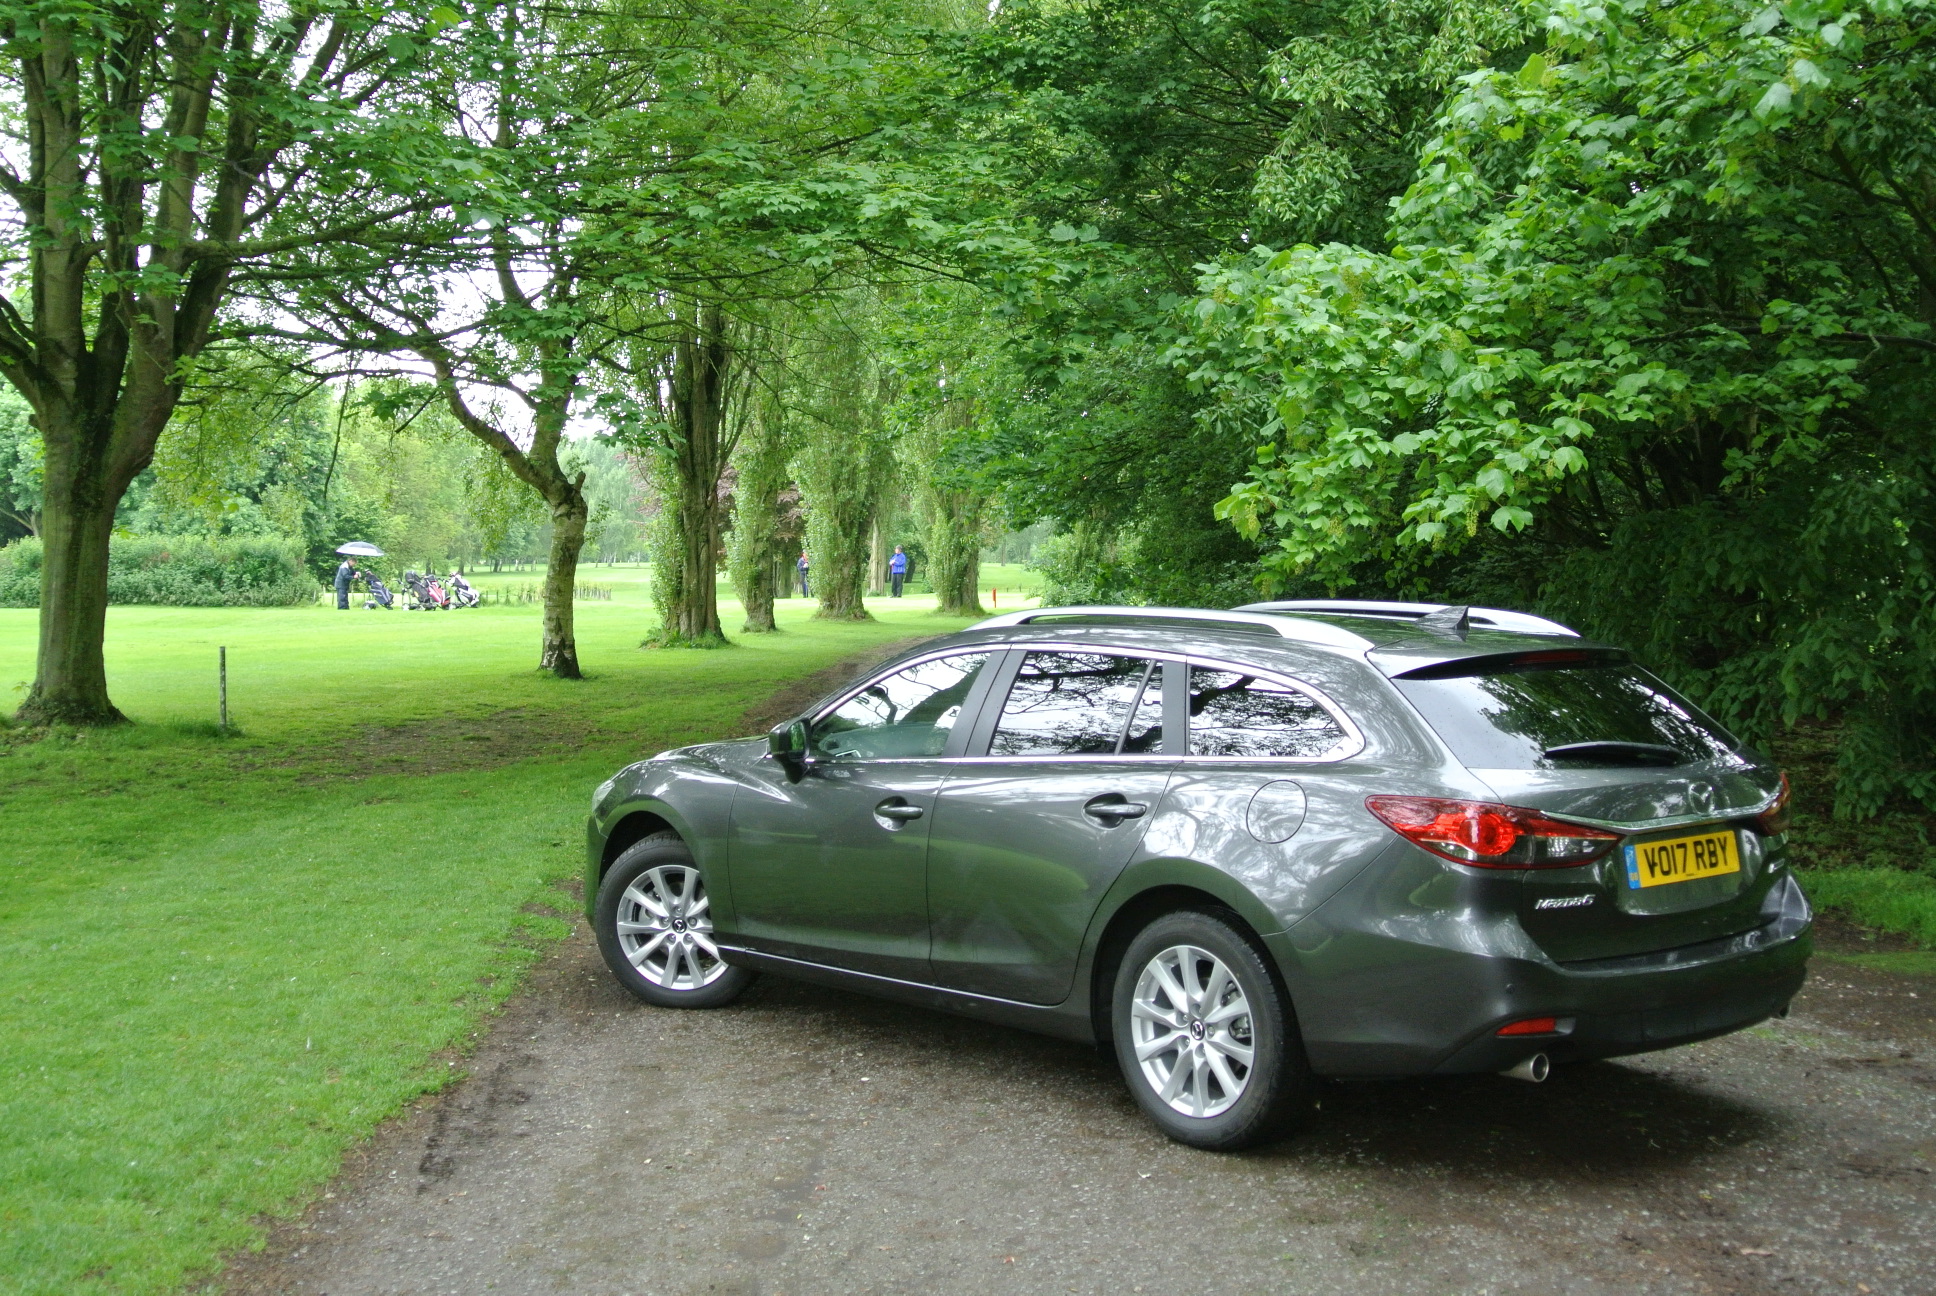 Built like the proverbial brick outhouse, the Mazda6 Tourer still wins hearts and minds